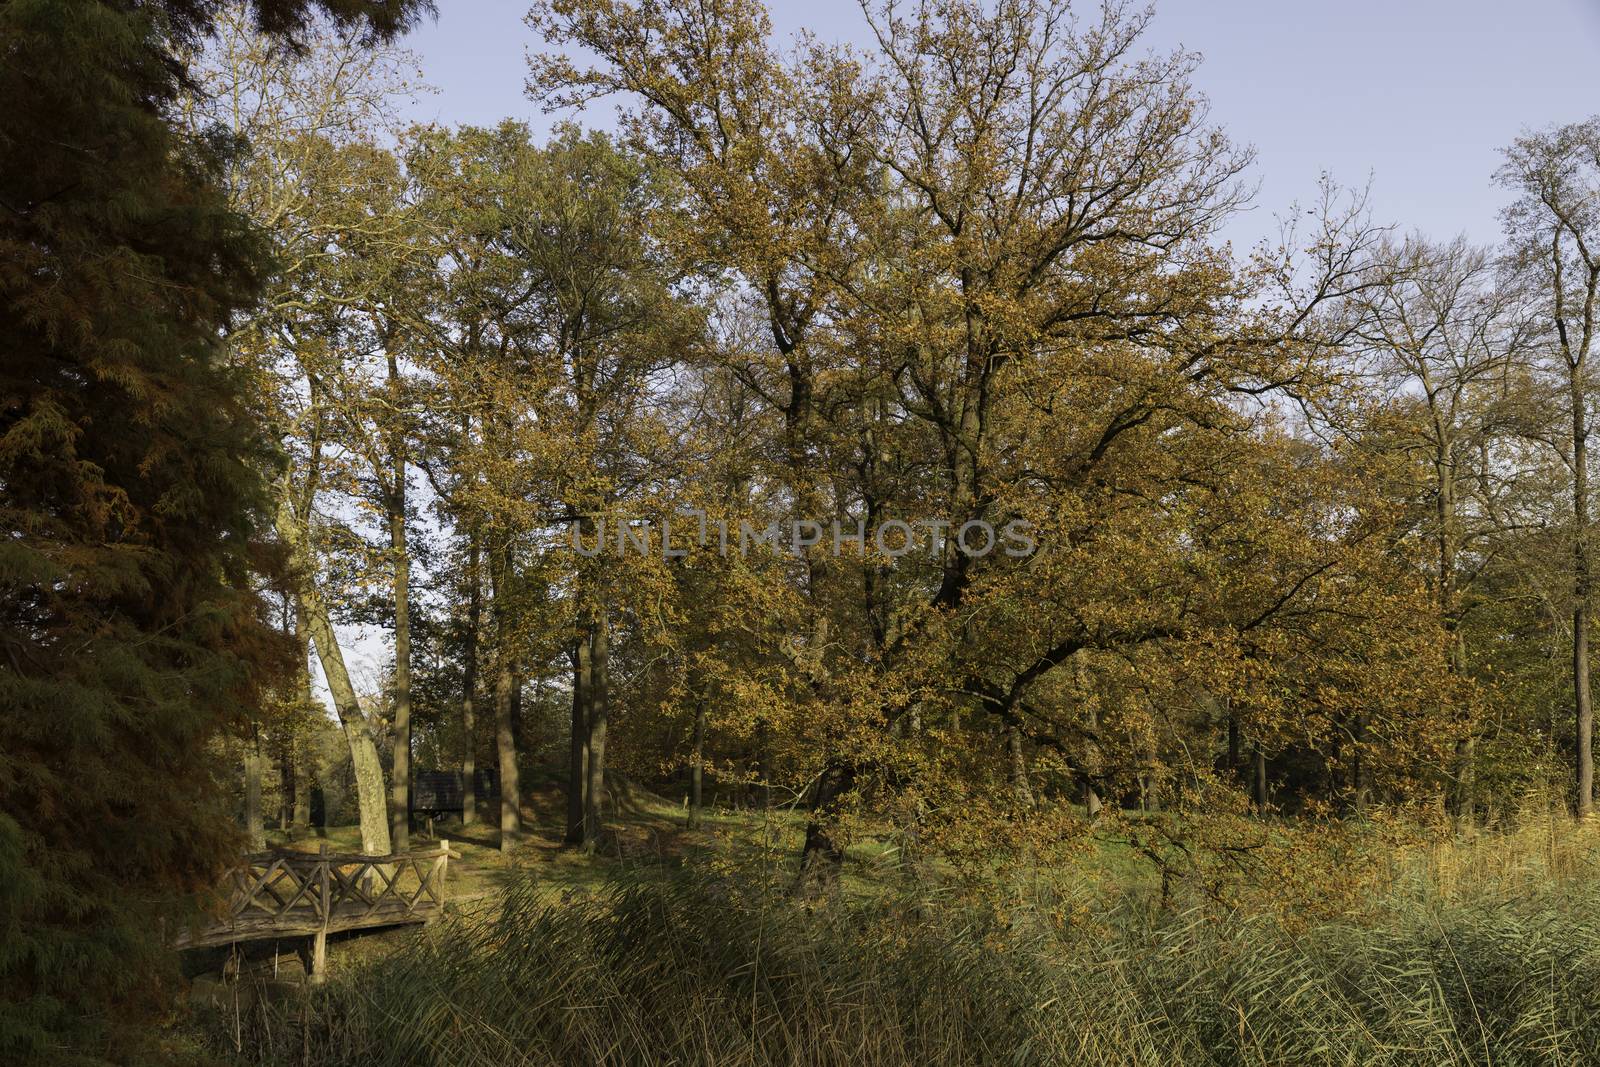 autum forest with red brown and golden colors in national park de veluwe in holland